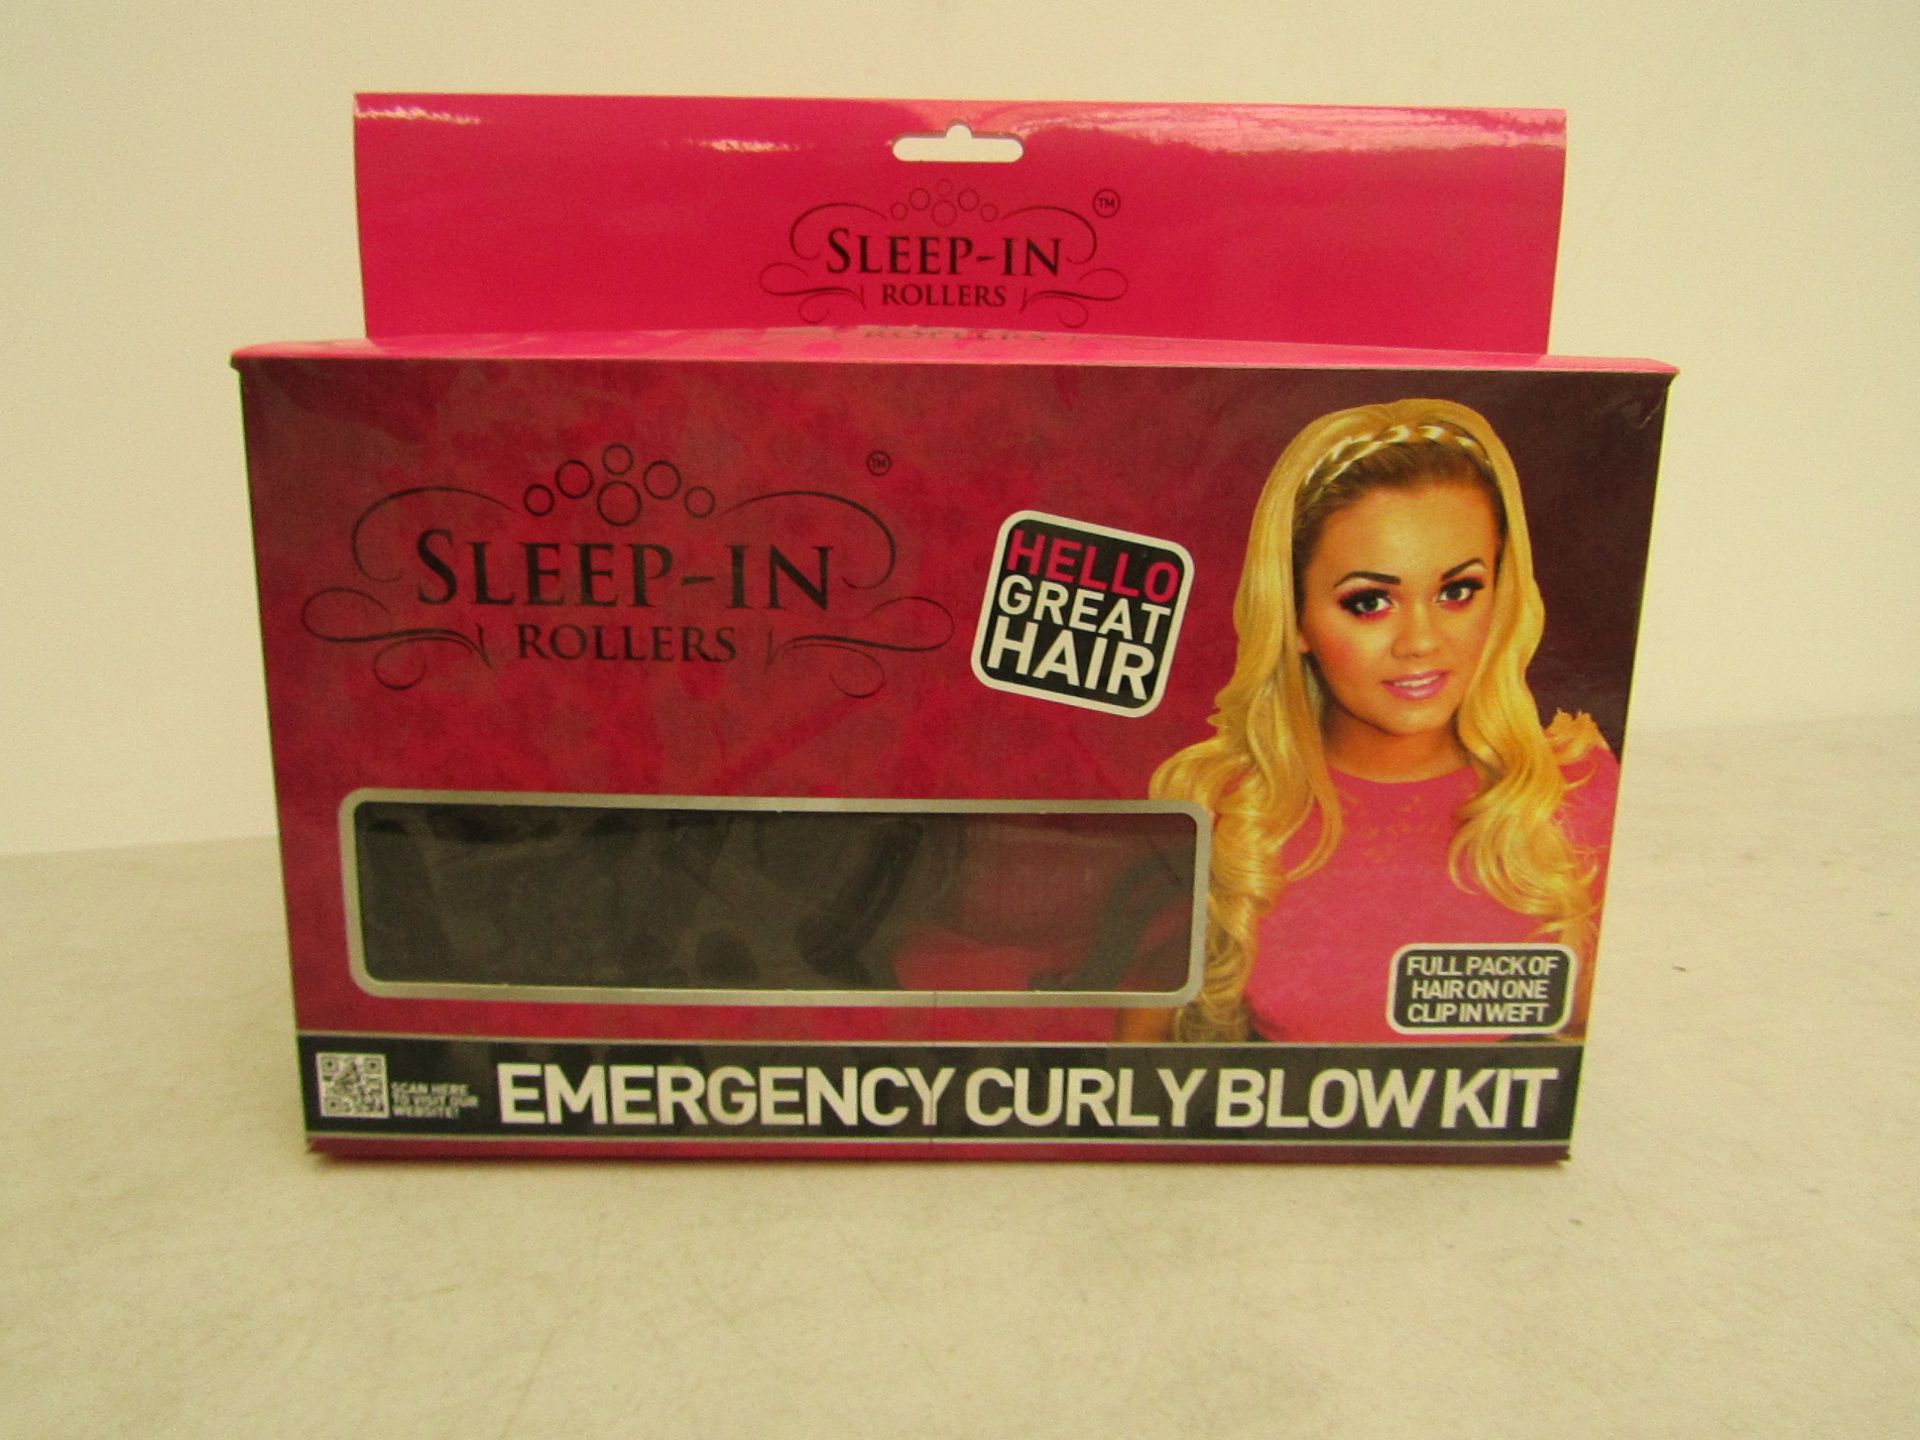 Emergency curly blow kit by 'Sleep-in rollers'. Pack contains full pack of Brown hair on one clip in